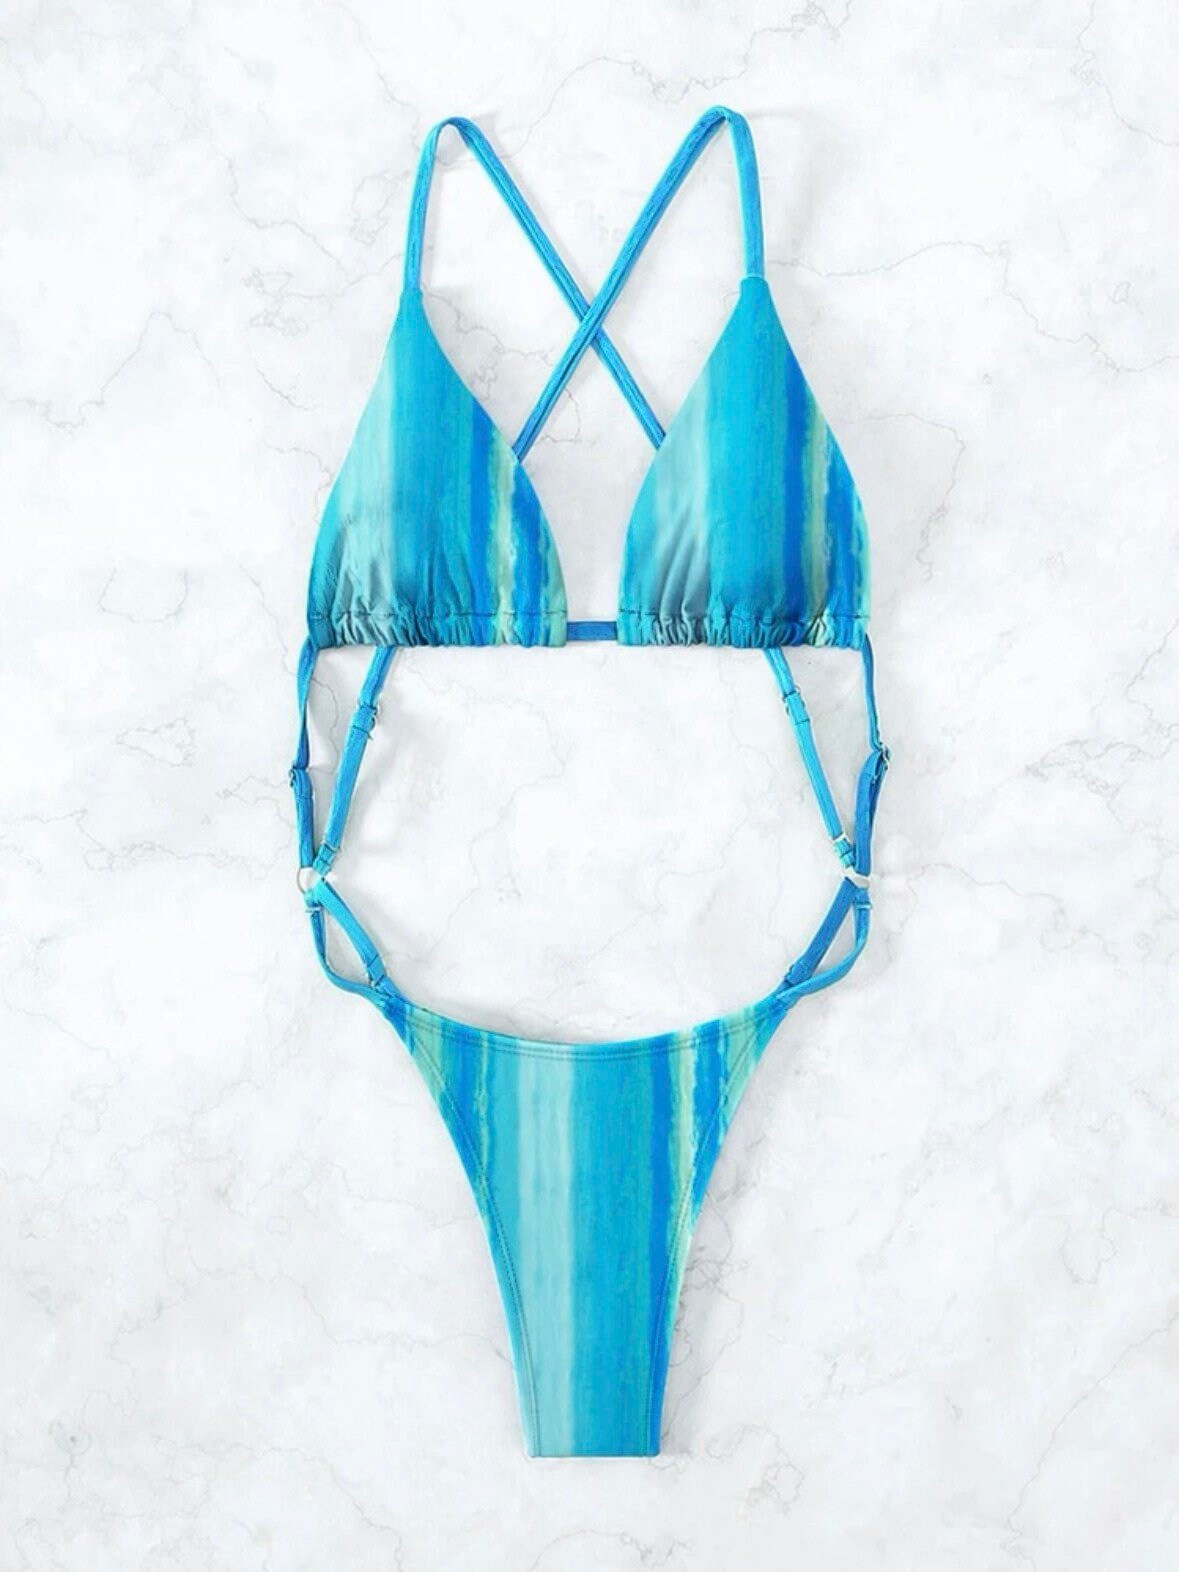 The Tie Dye Sexy One Piece Swimsuit with a backless, high cut, criss cross, micro sexy vibe in blue, pink, or red tones